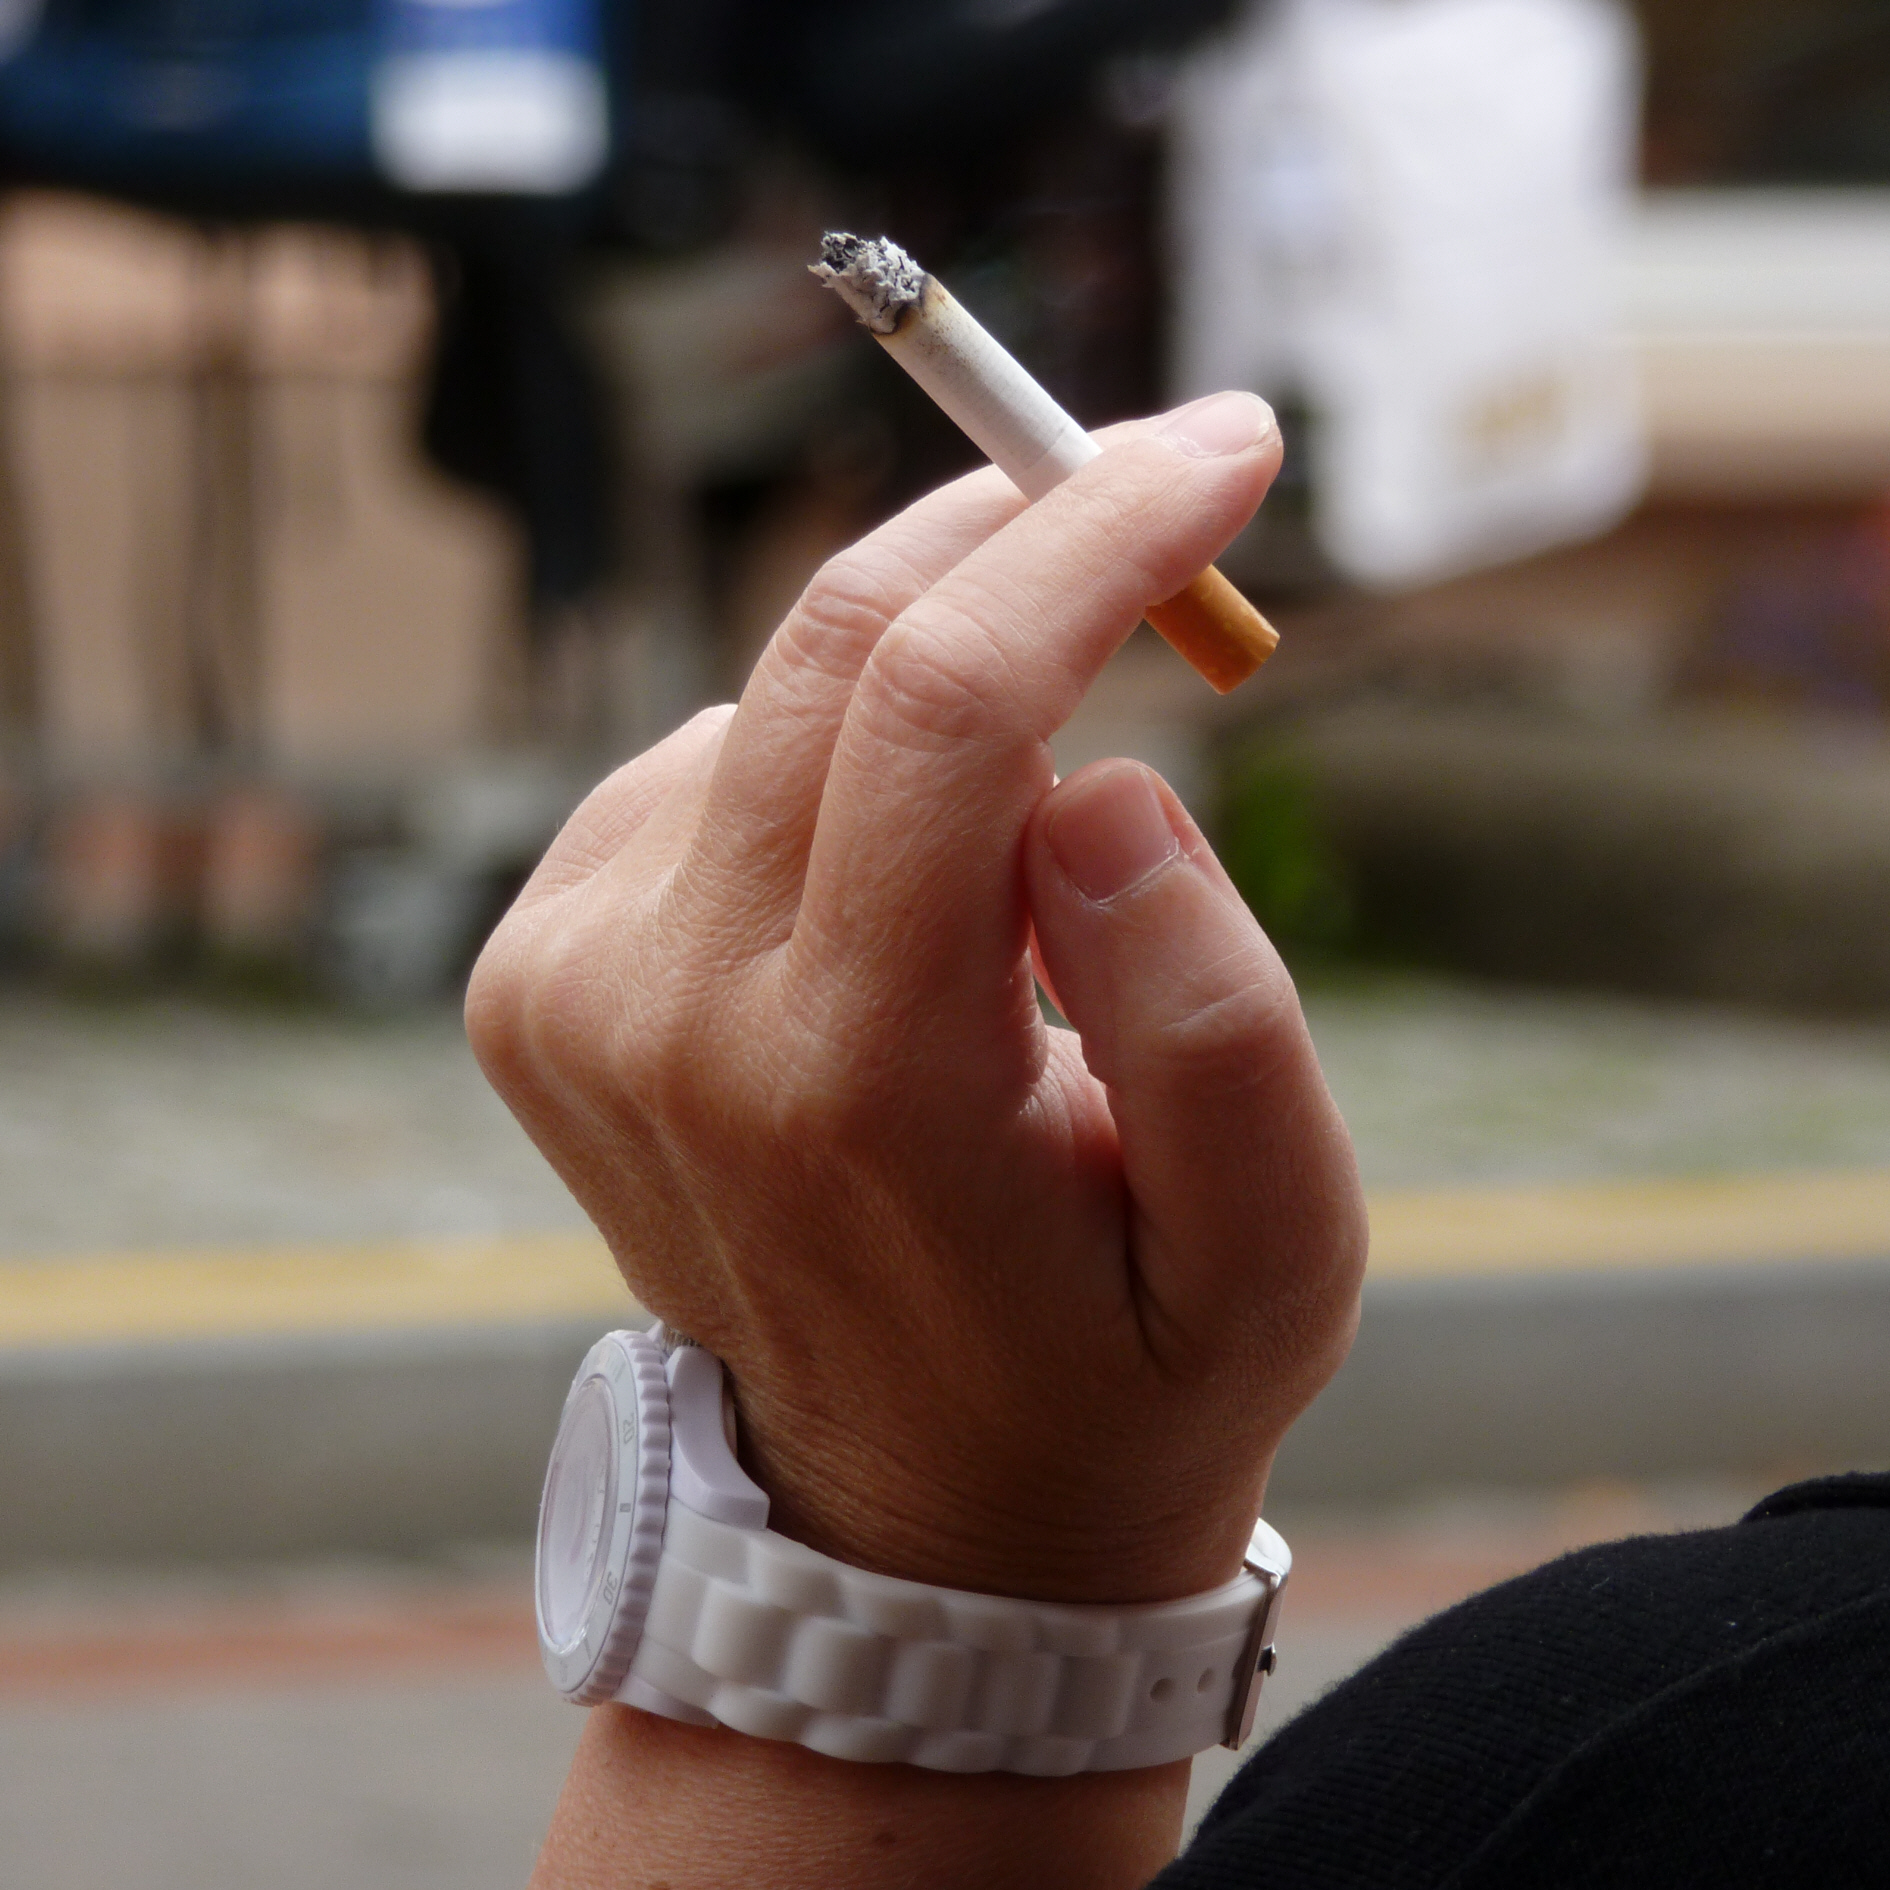 New resources helps teens quit smoking